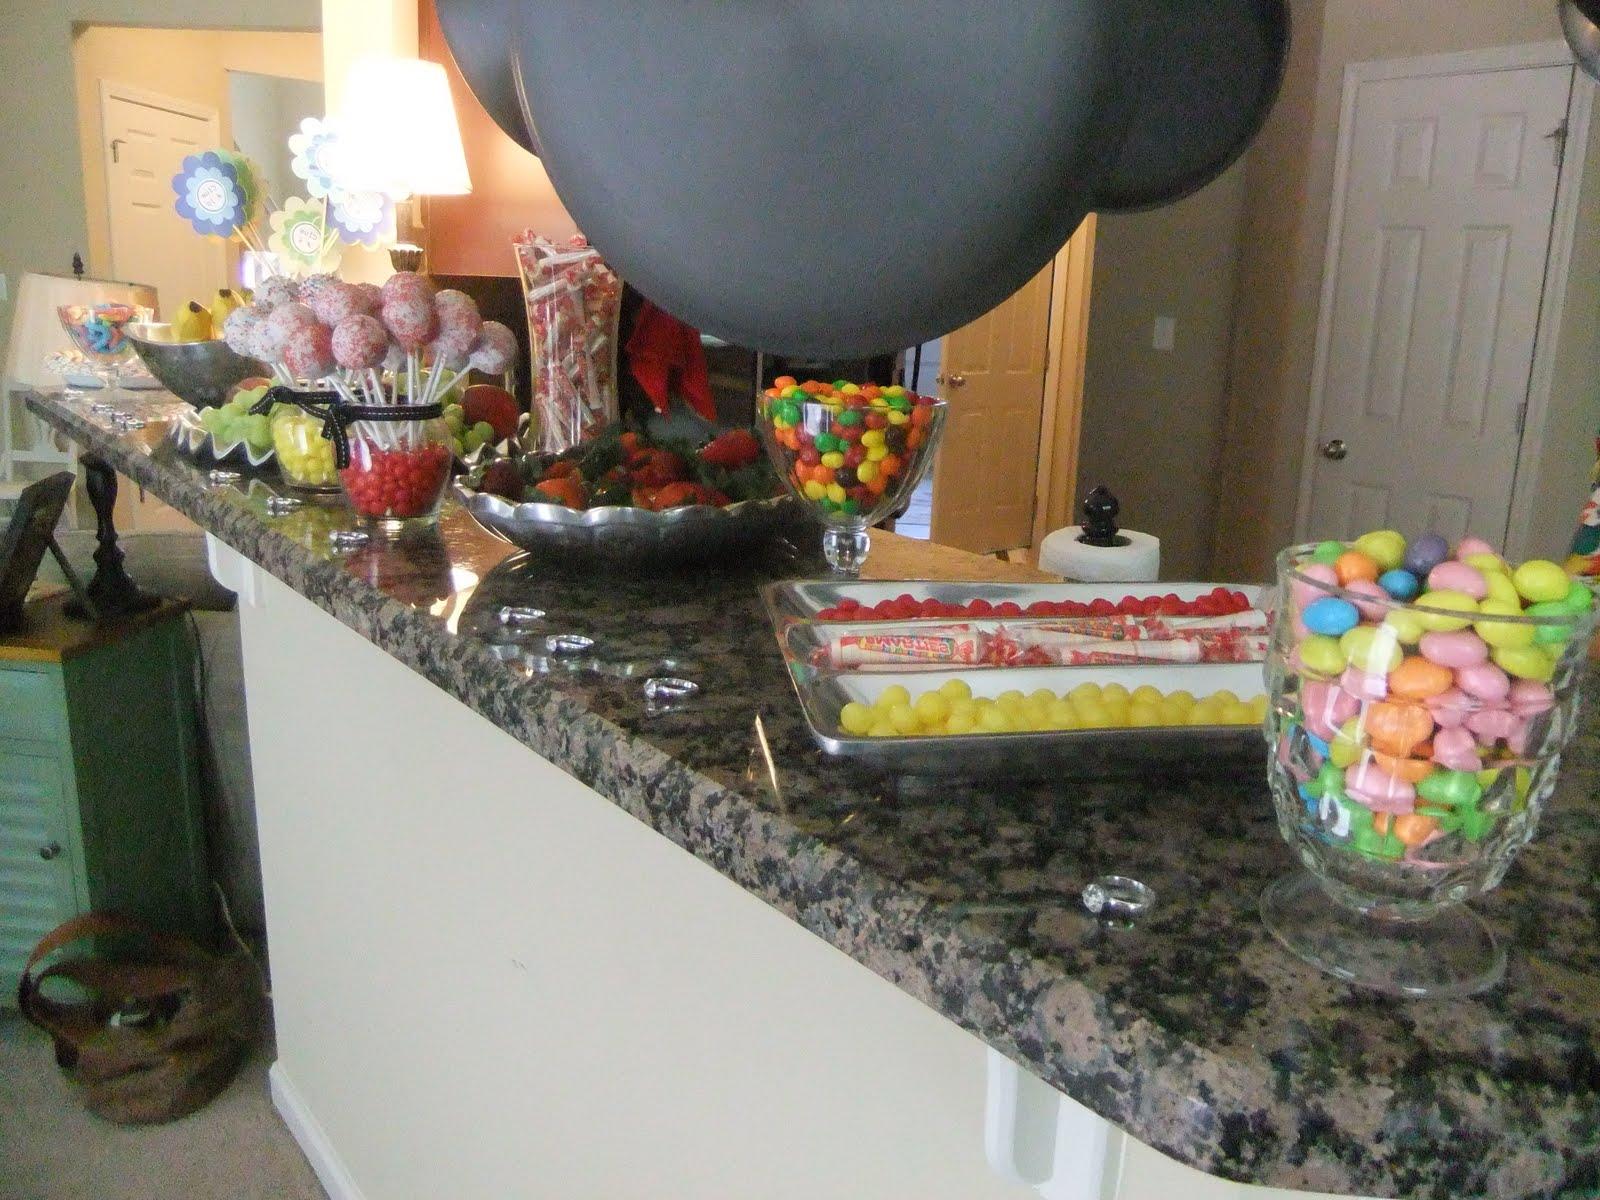 Loved this little candy buffet